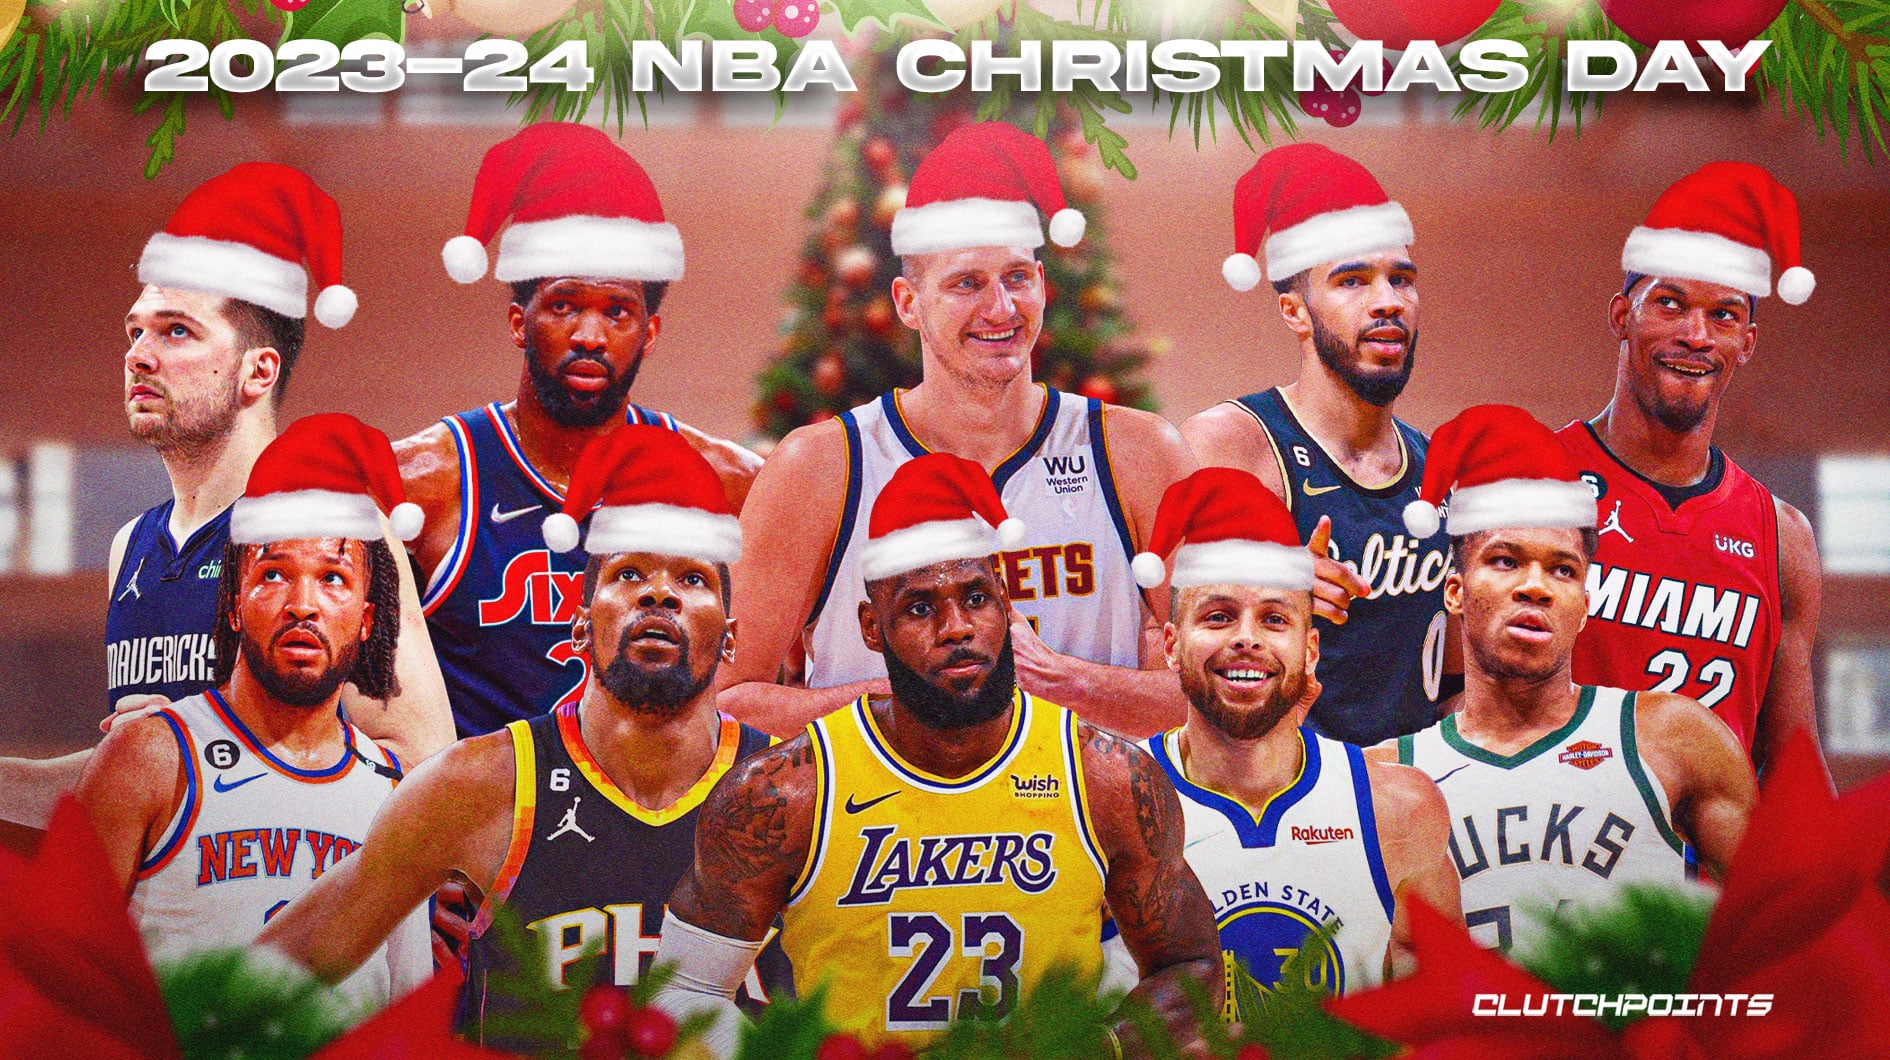 Lakers News: New Christmas Day Jerseys Leaked